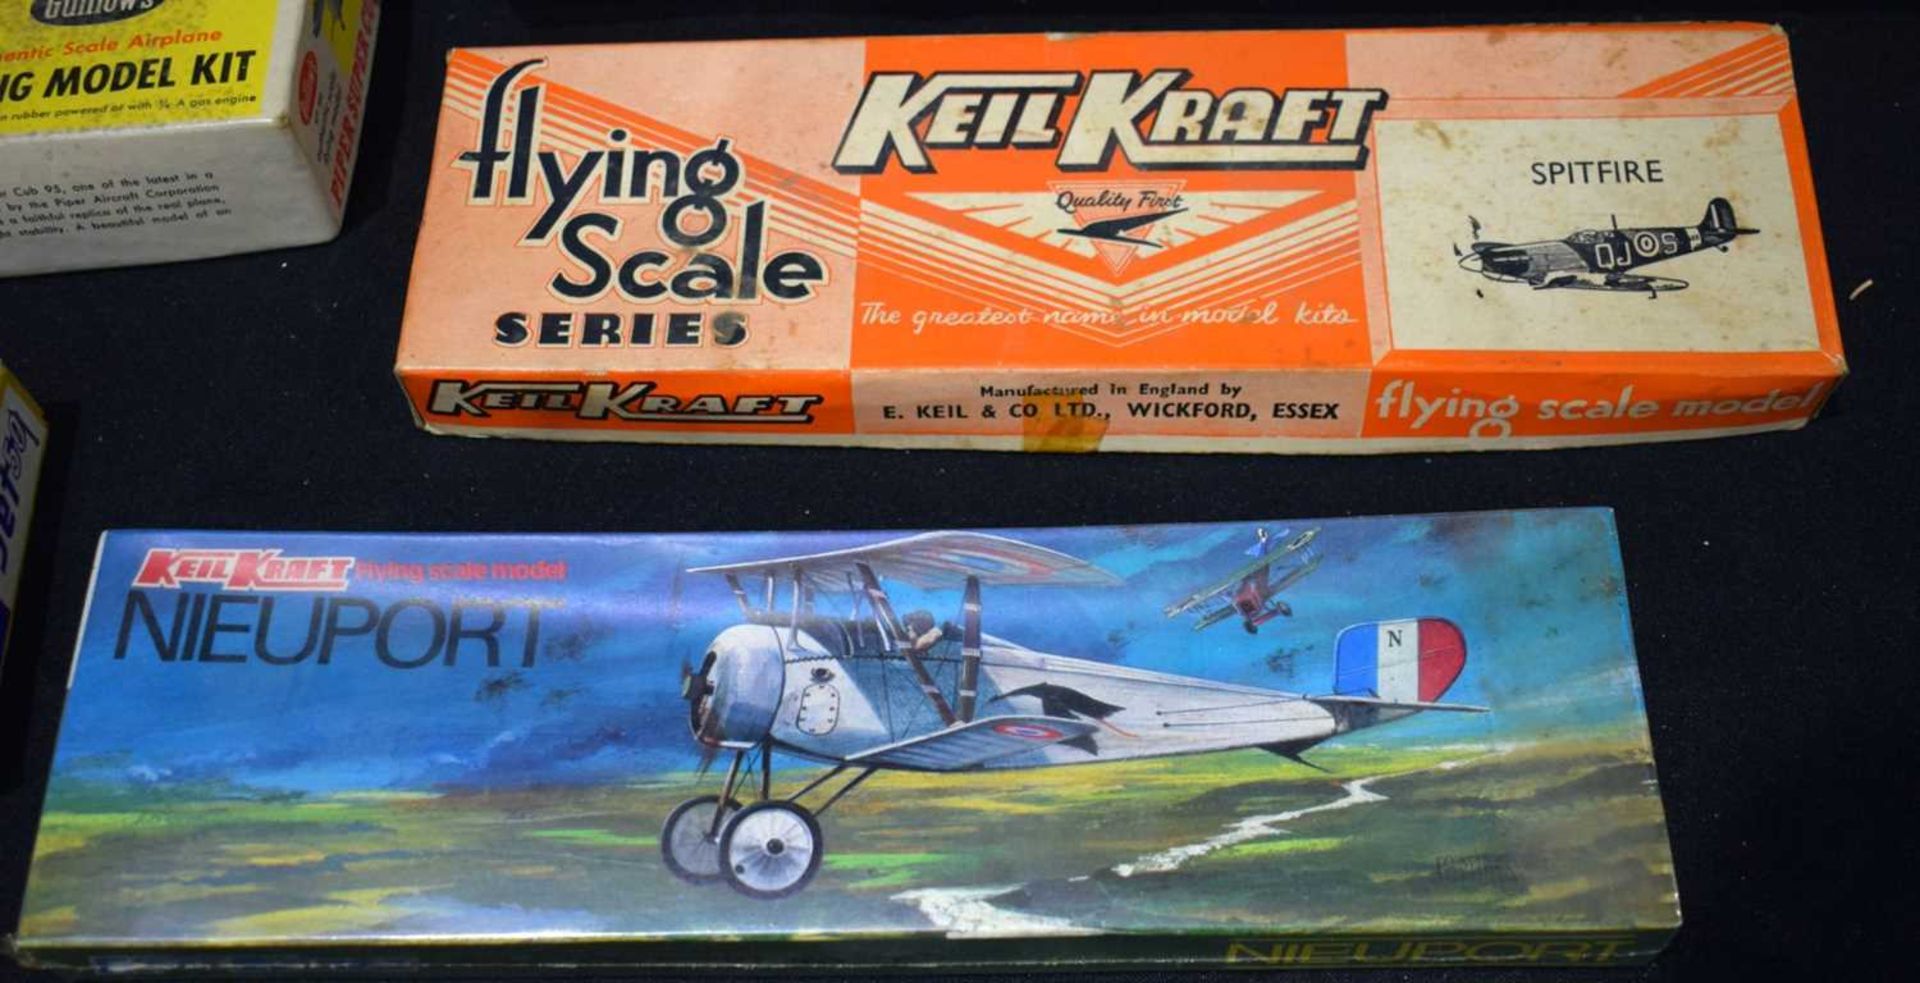 A Collection of boxed model aircraft Kits Keil Crafts, Guillow's etc (6) - Image 5 of 5